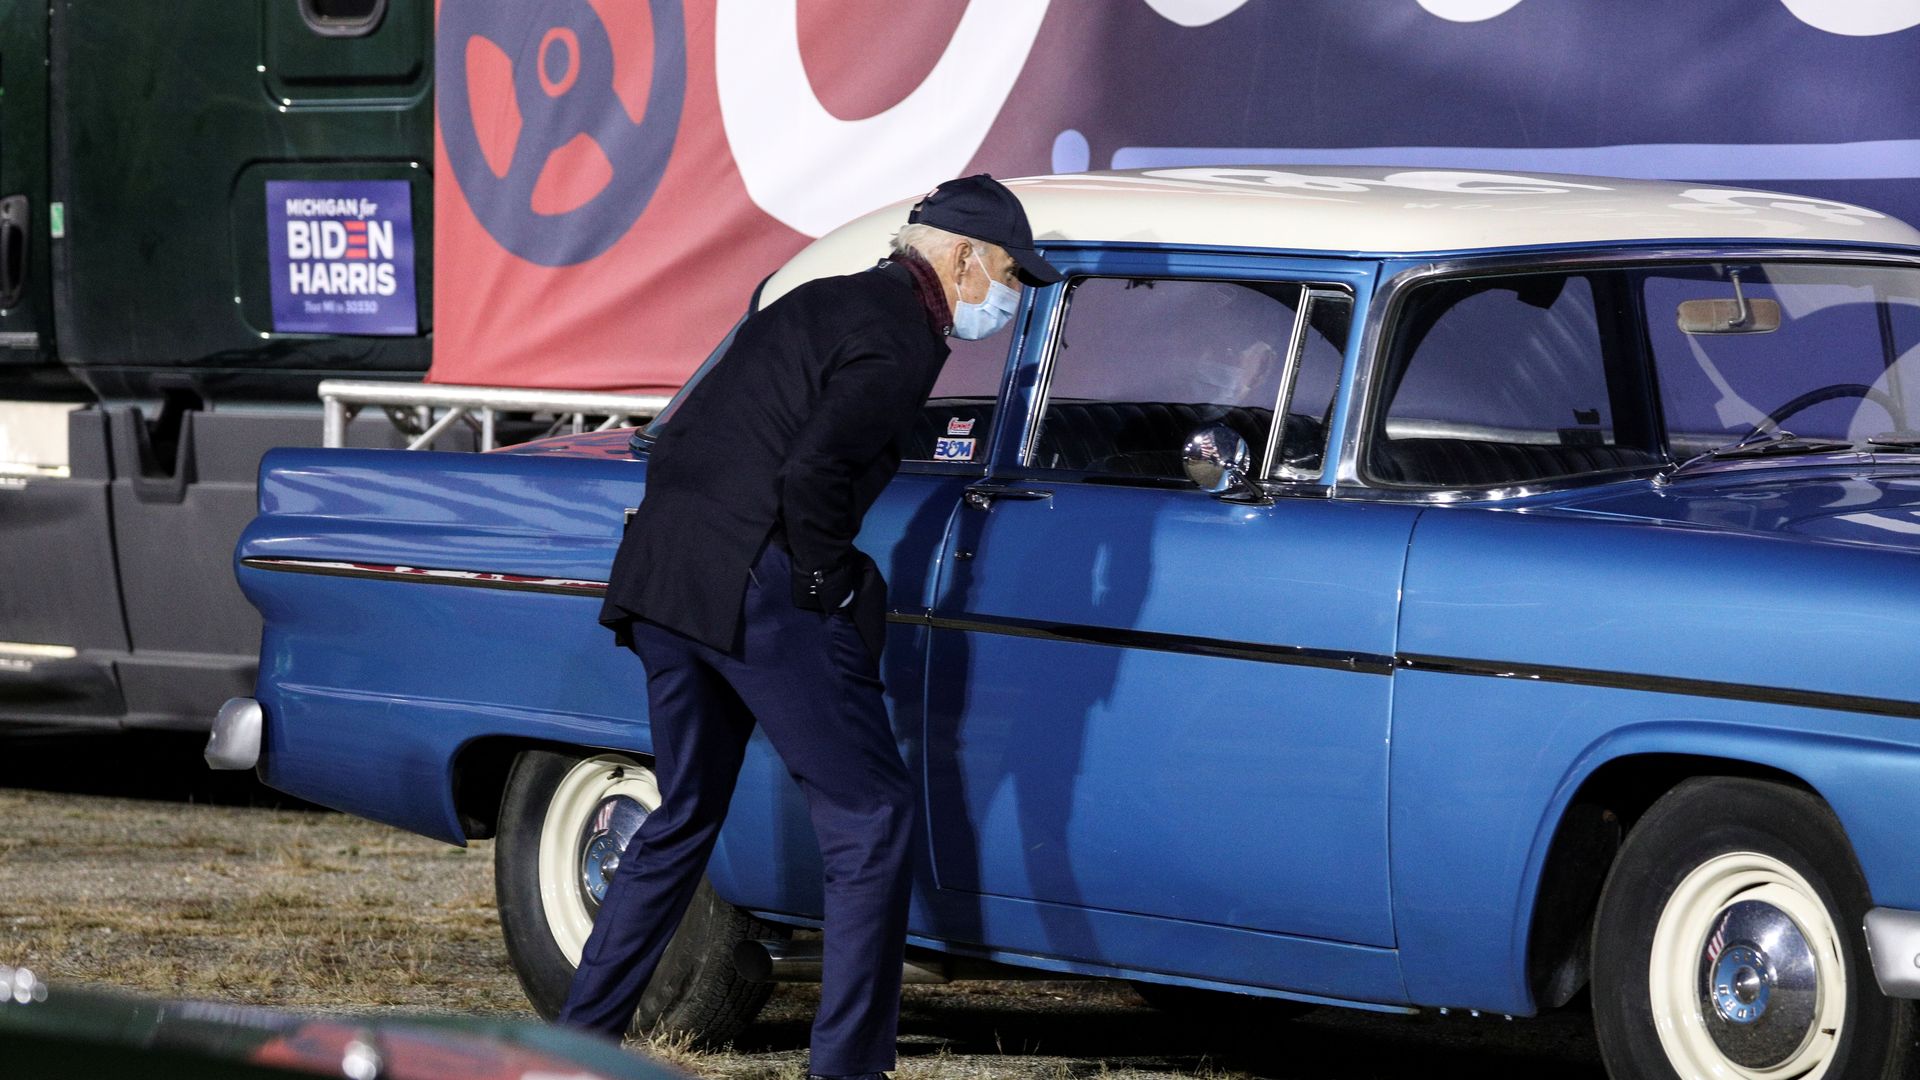 Joe Biden checks out a classic car at the end of a voter mobilization event at the Michigan State Fairgrounds in Novi, Mich., yesterday.